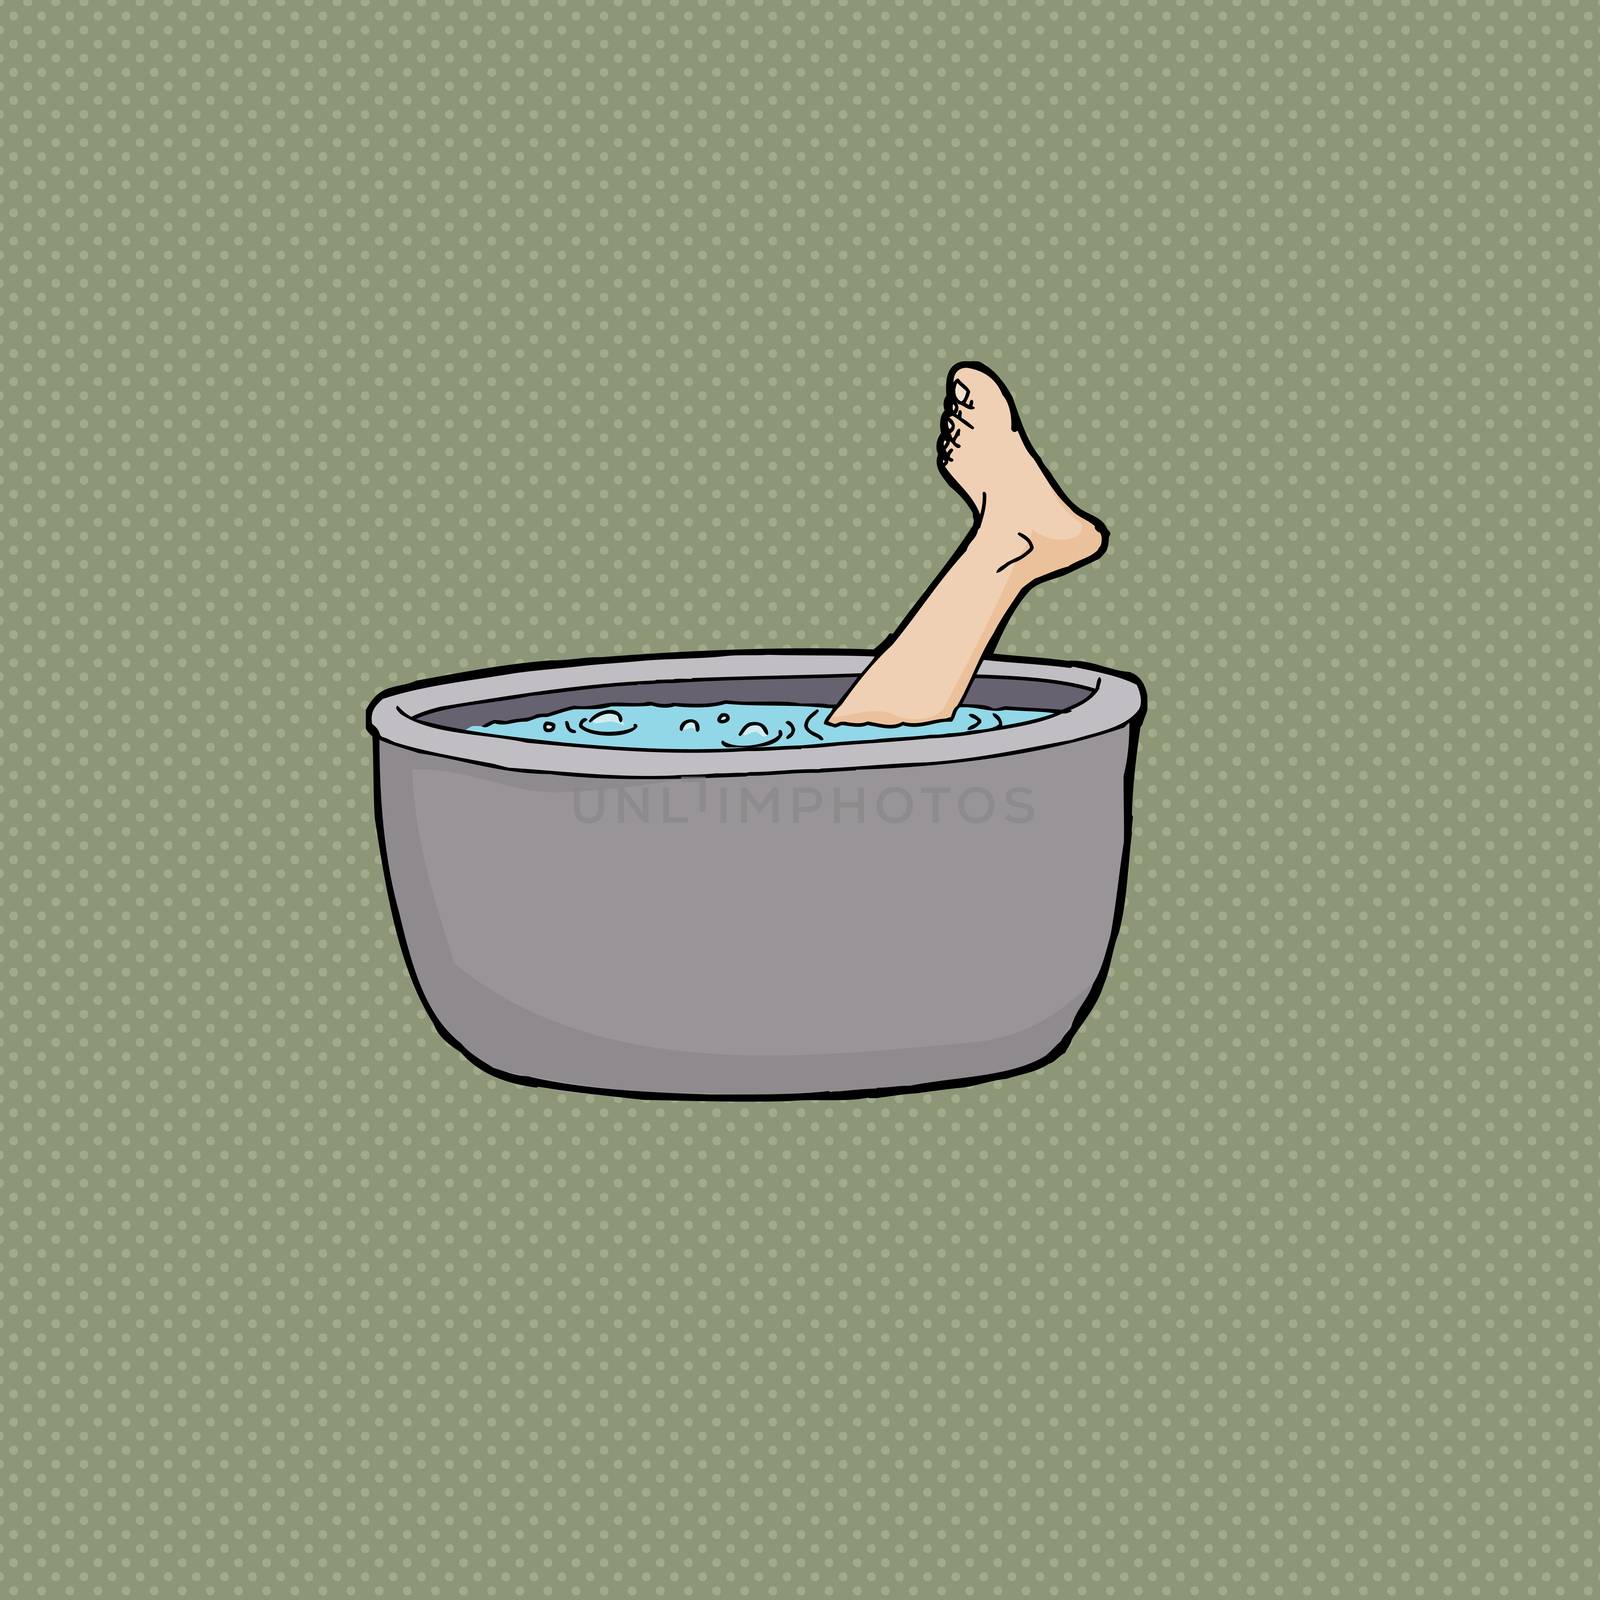 Foot in Boiling Water by TheBlackRhino